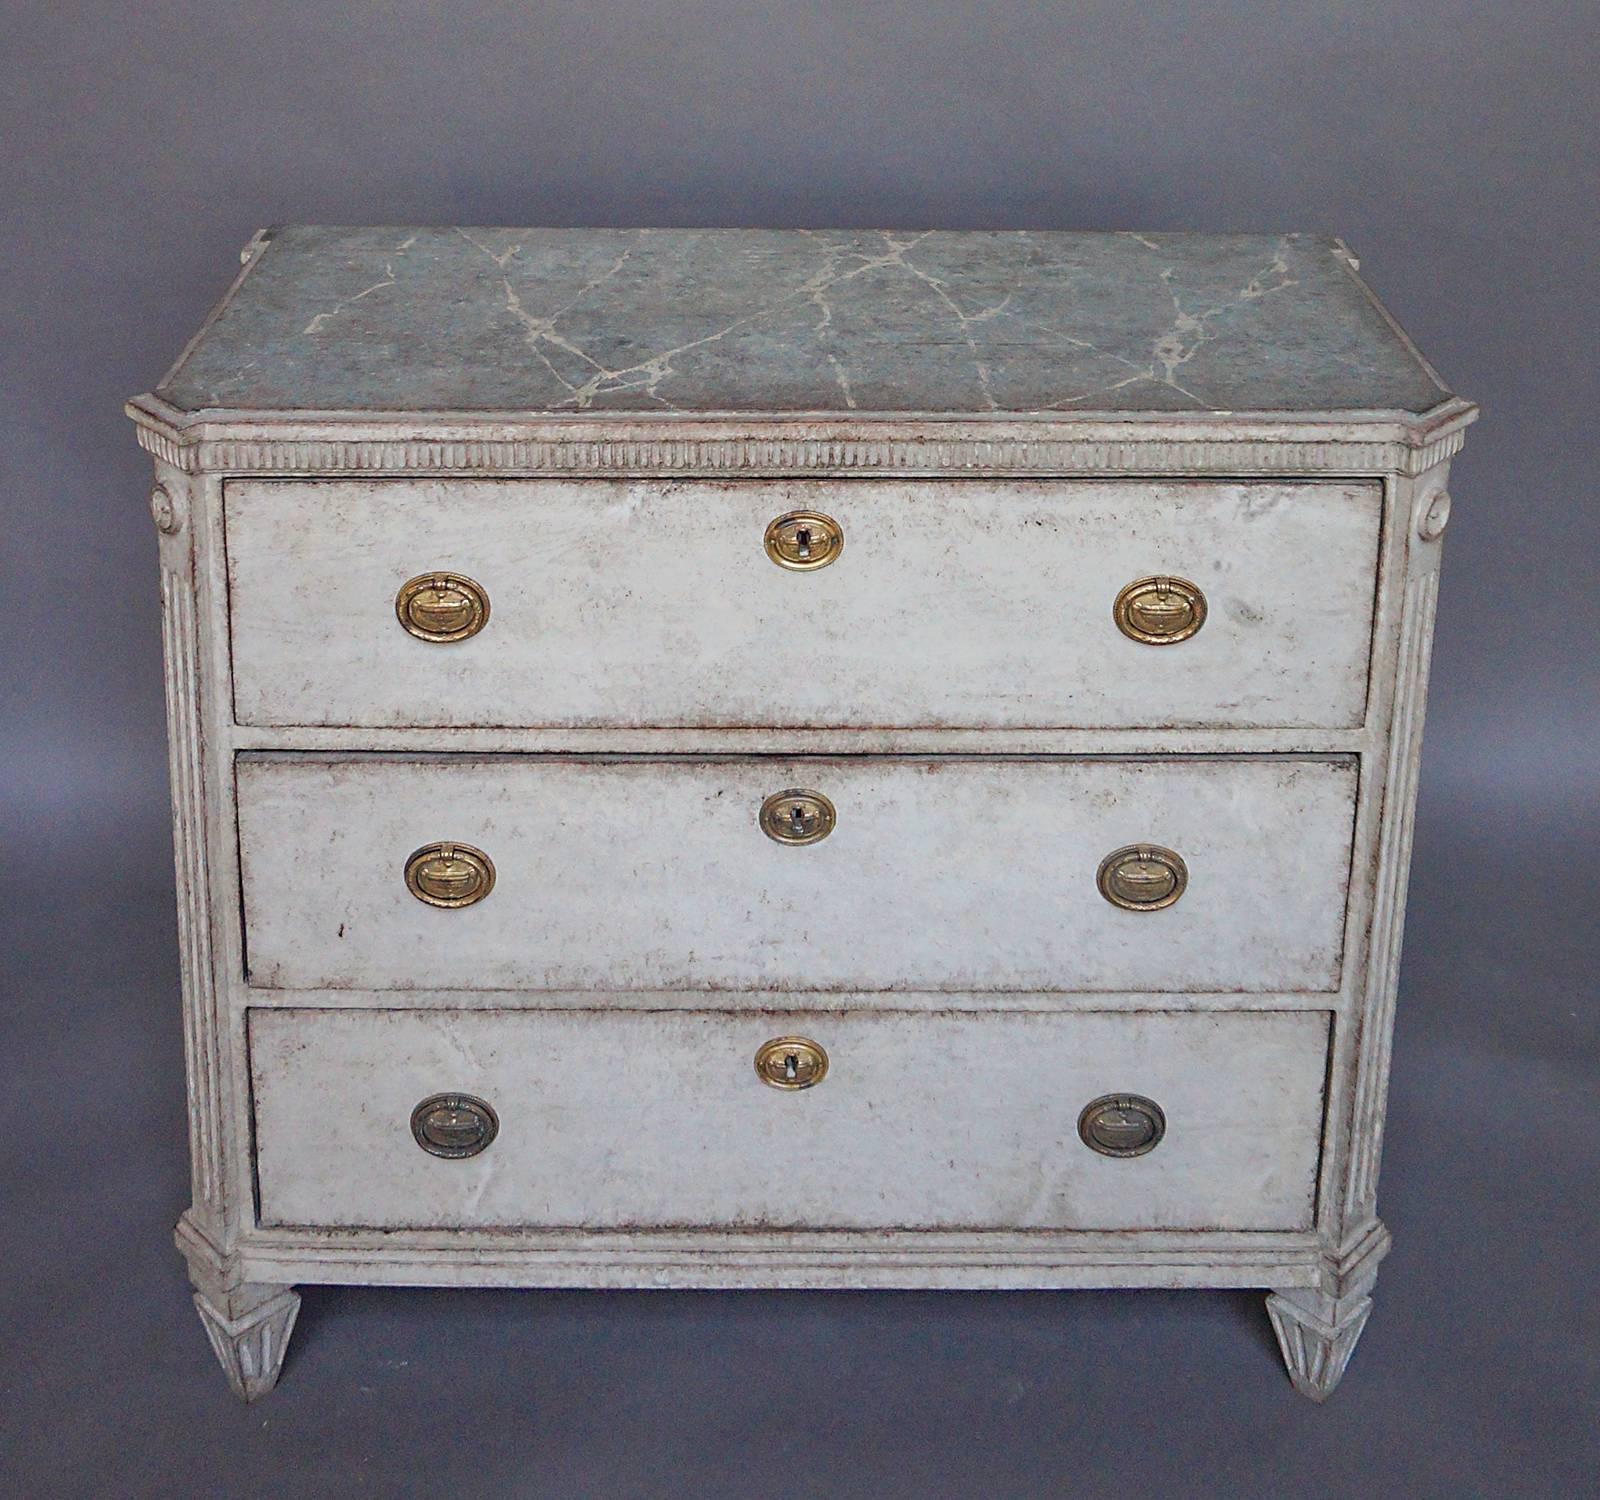 Three-drawer chest from the neoclassical period, Sweden, circa 1850. The top drawer features a raised lattice pattern and sits above a band of projecting molding. Dentil molding on the front and sides below the marbled top and bold reeding at the